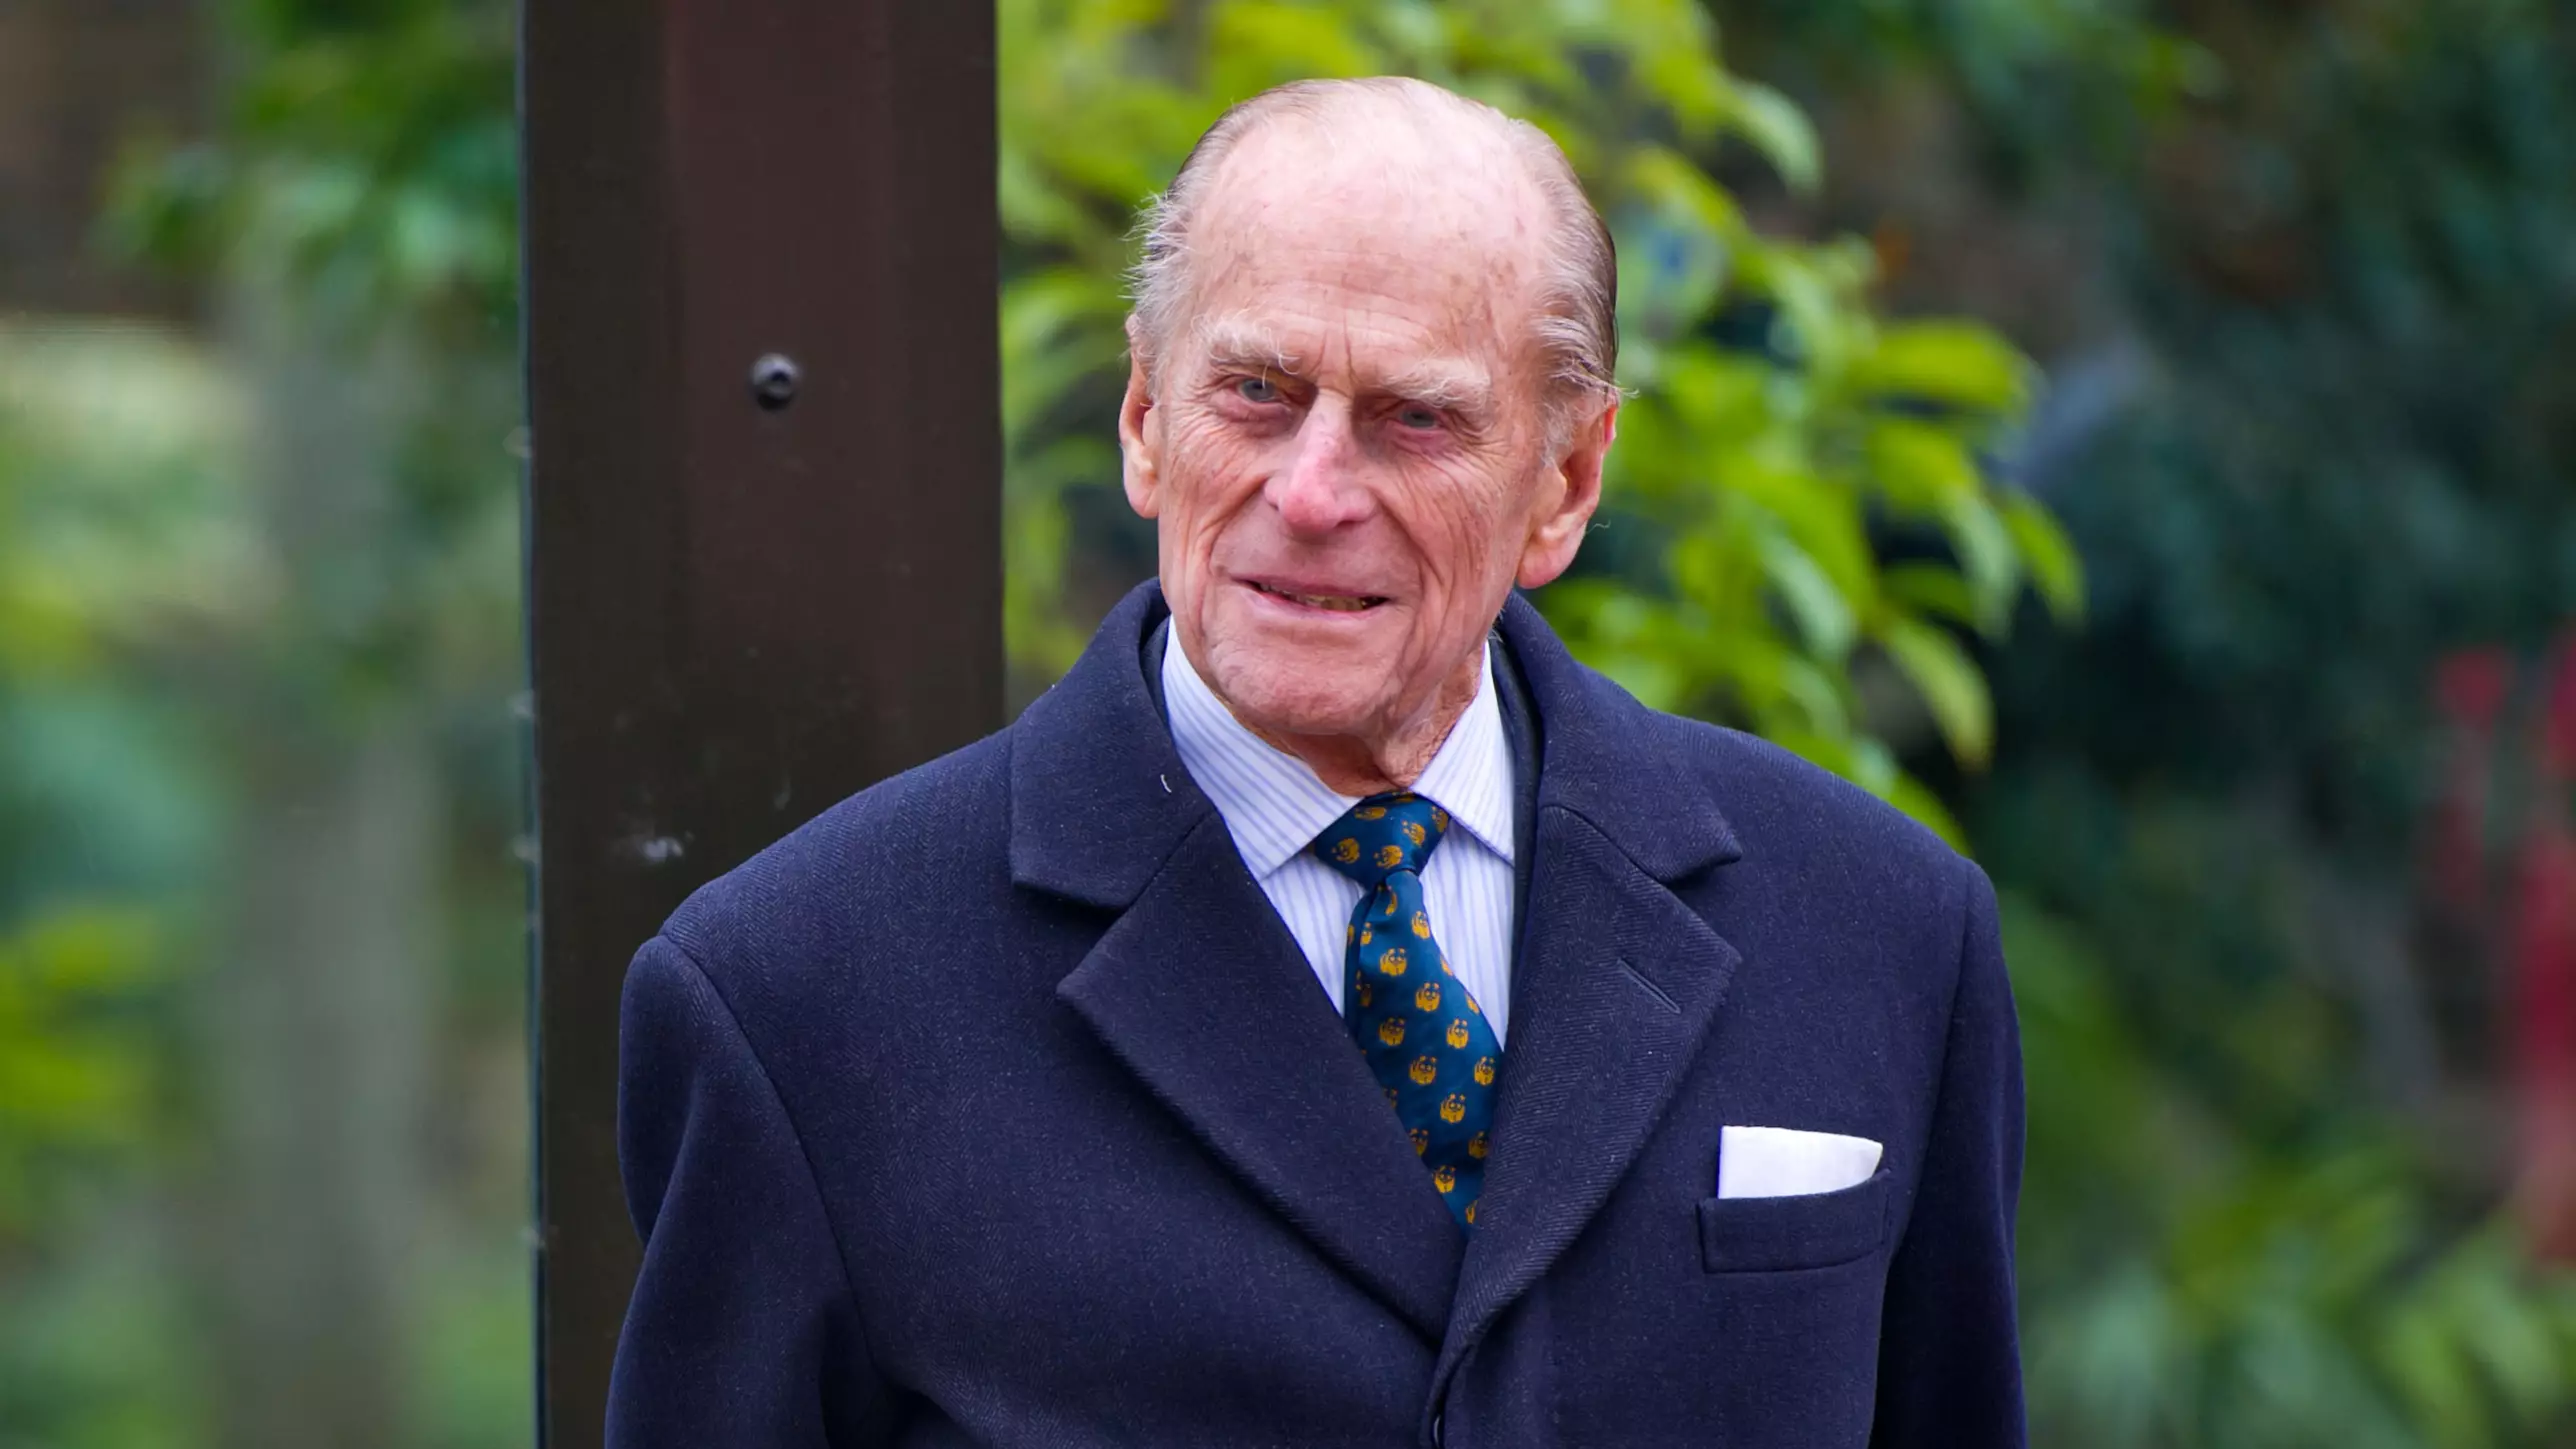 Prince Philip's Coffin To Be Carried In Land Rover He Helped Design